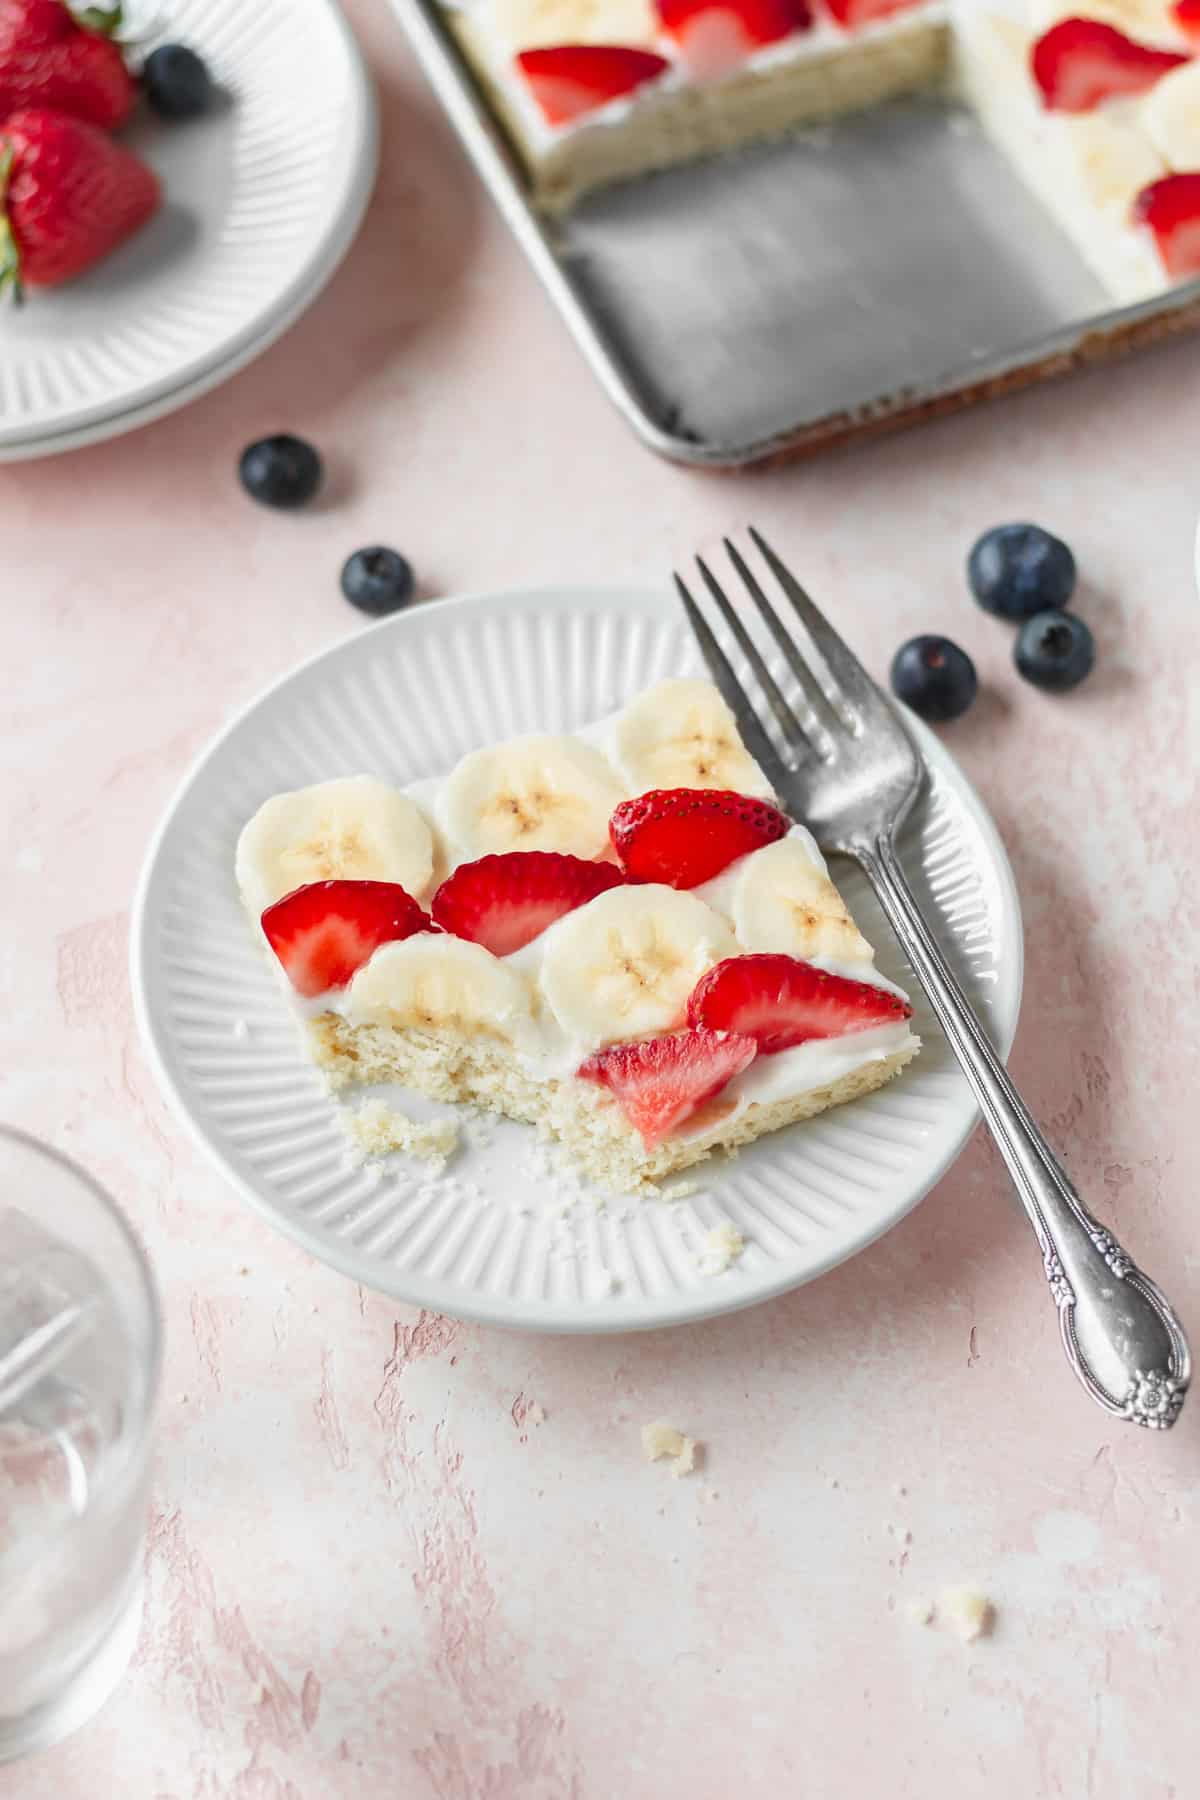 A slice of American flag fruit pizza on a dessert plate with a silver fork.